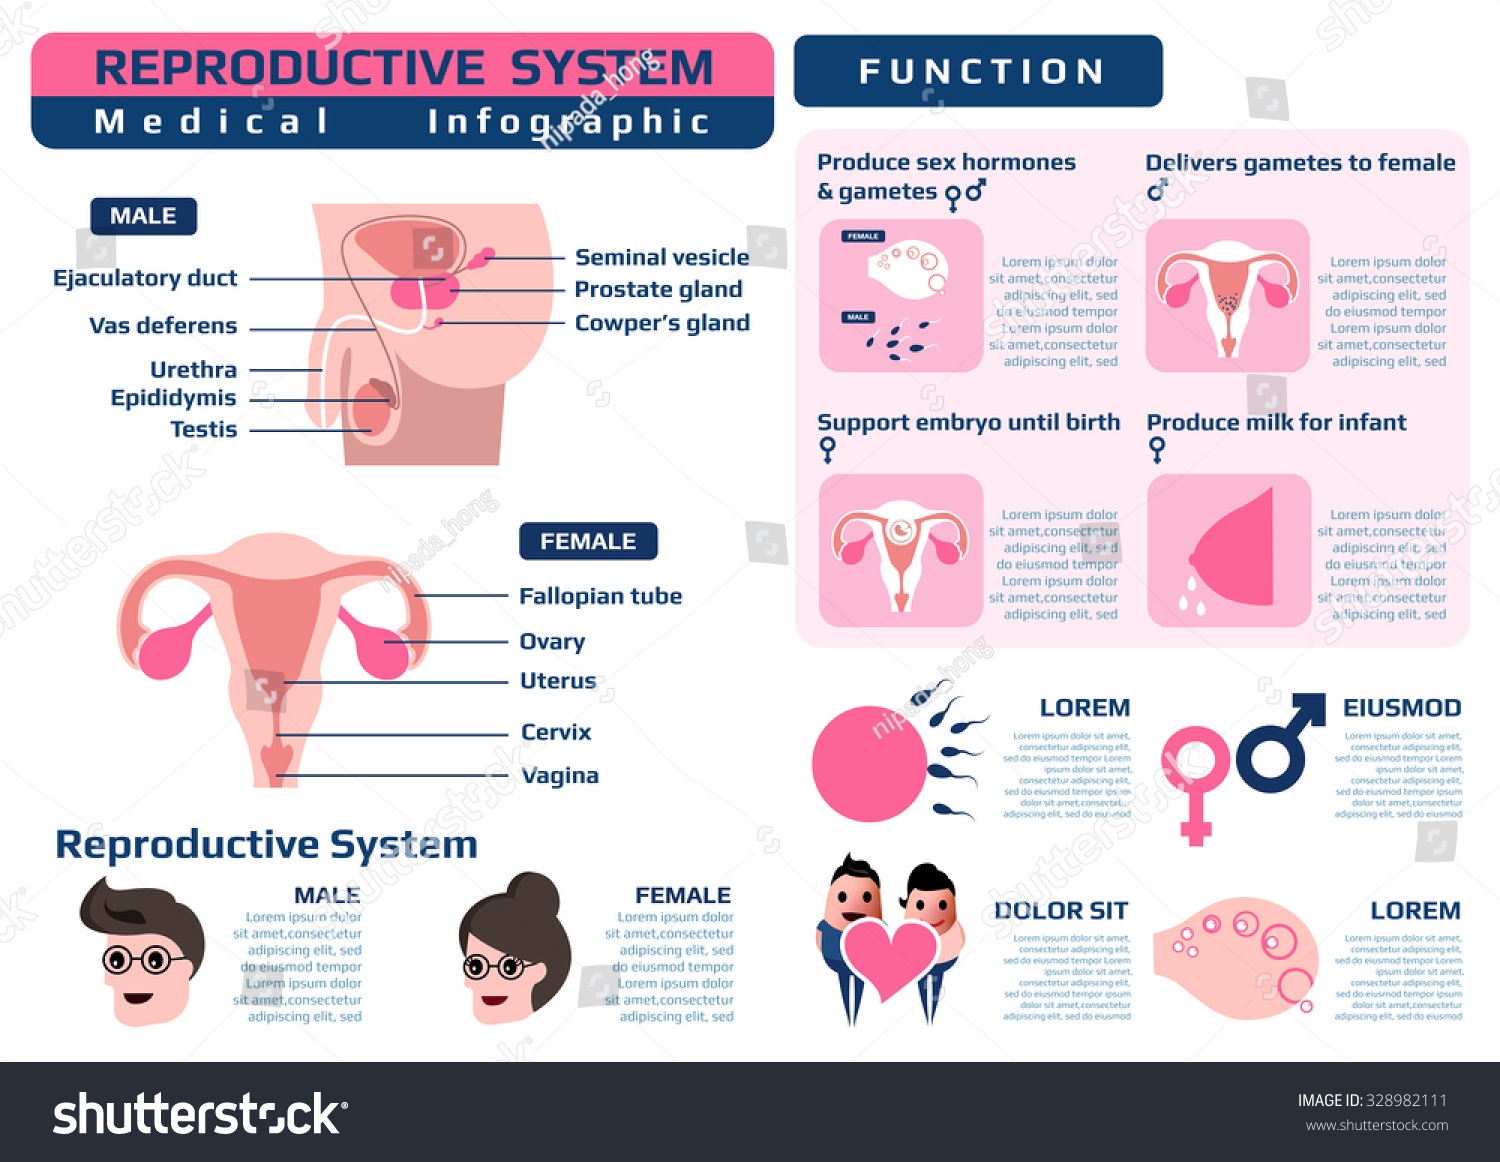 Infographic Of Function Of Reproductive System Medical Health Infographic Vector Illustration